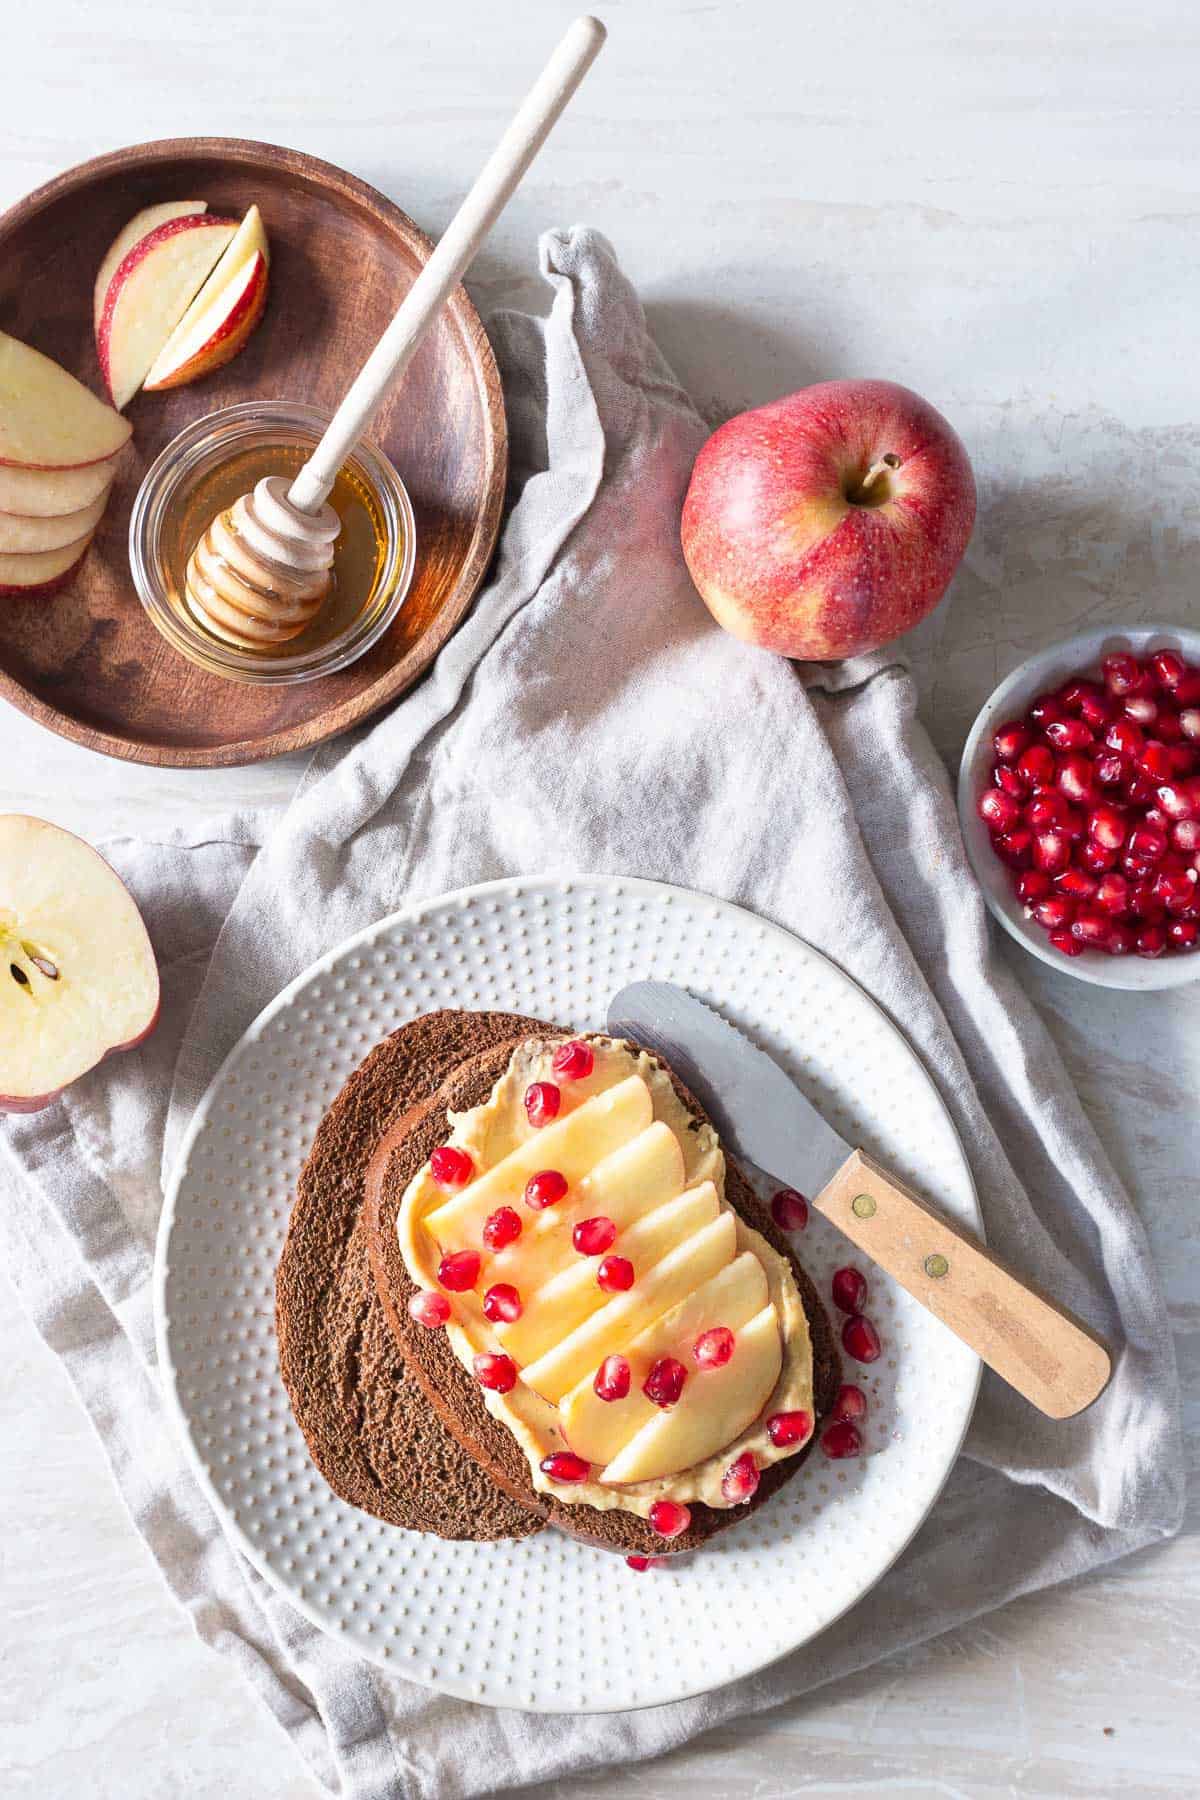 Honey apple hummus toast with pomegranates is a fun and quick winter snack idea.